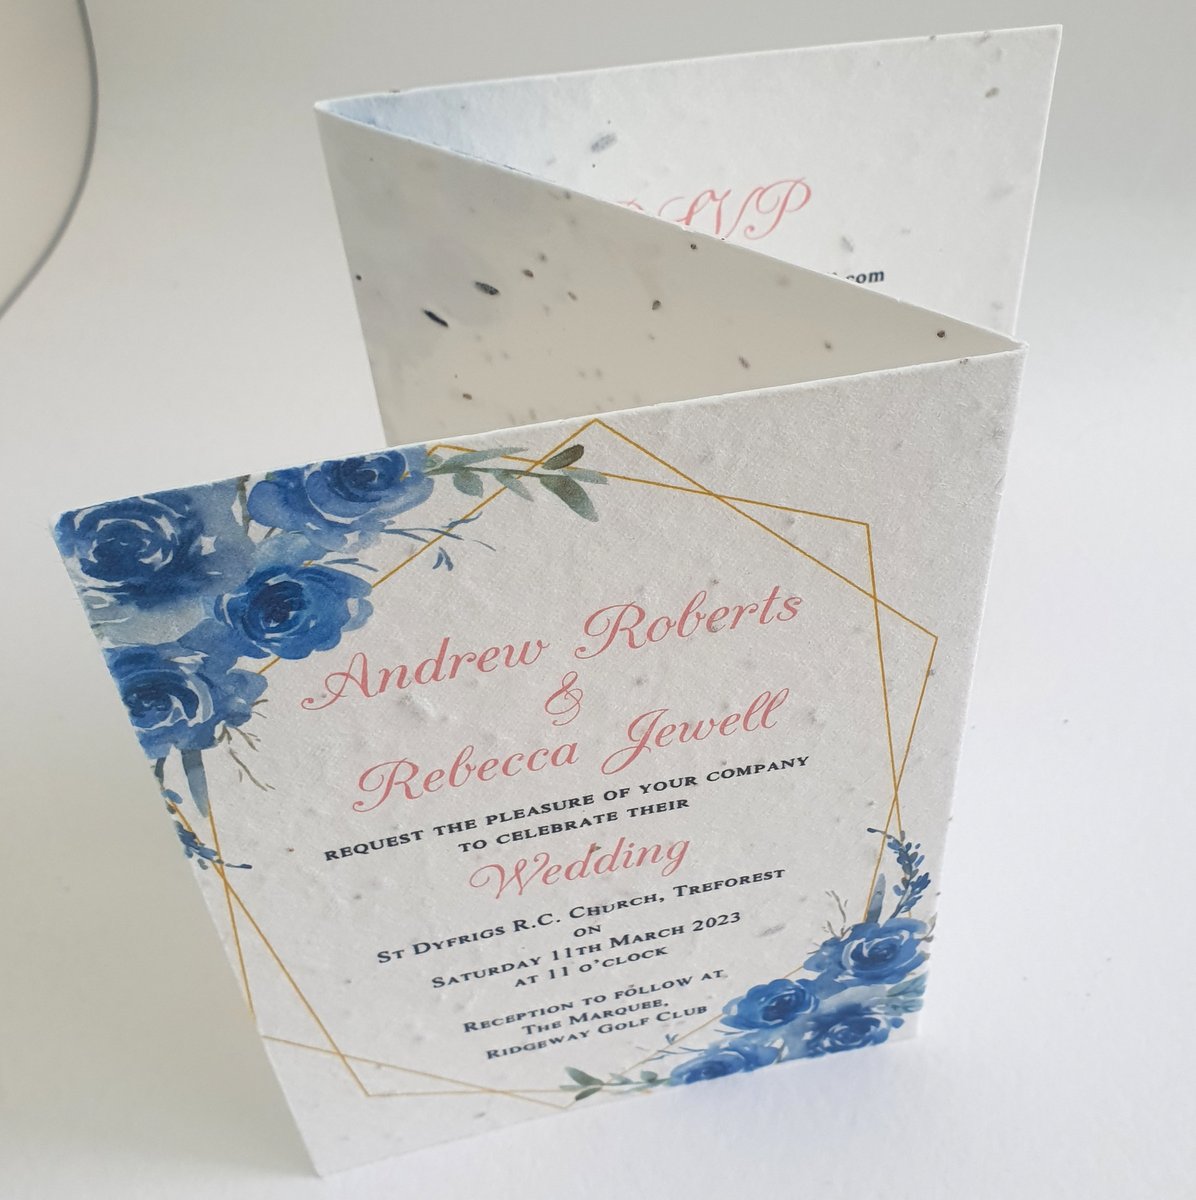 a wedding invitation with blue flowers and some pink decorative text, printed onto seed paper